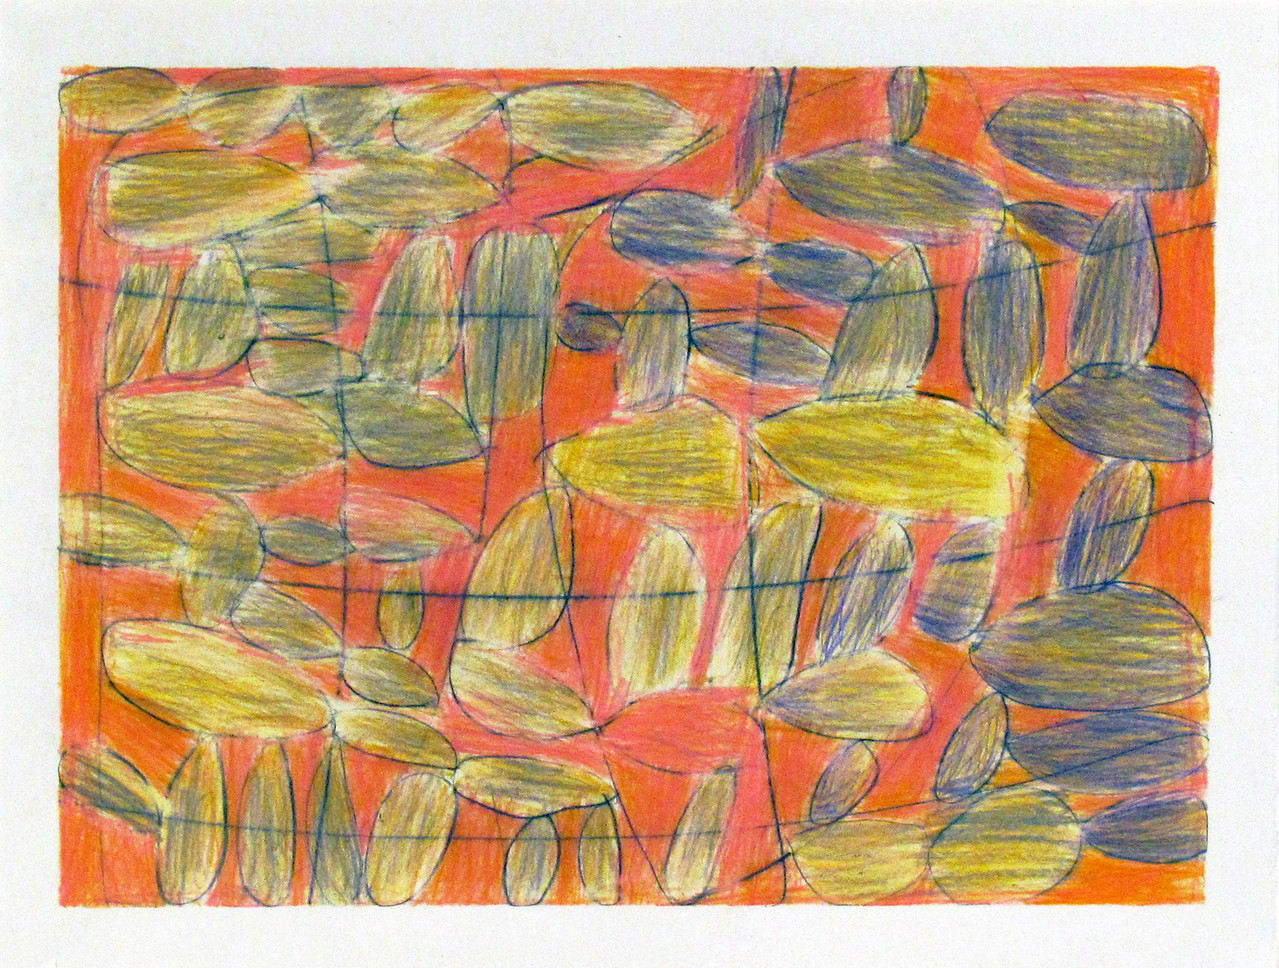 Untitled, 1988, Colored pencil and graphite on paper, 38.7 x 47 cm, BS 025